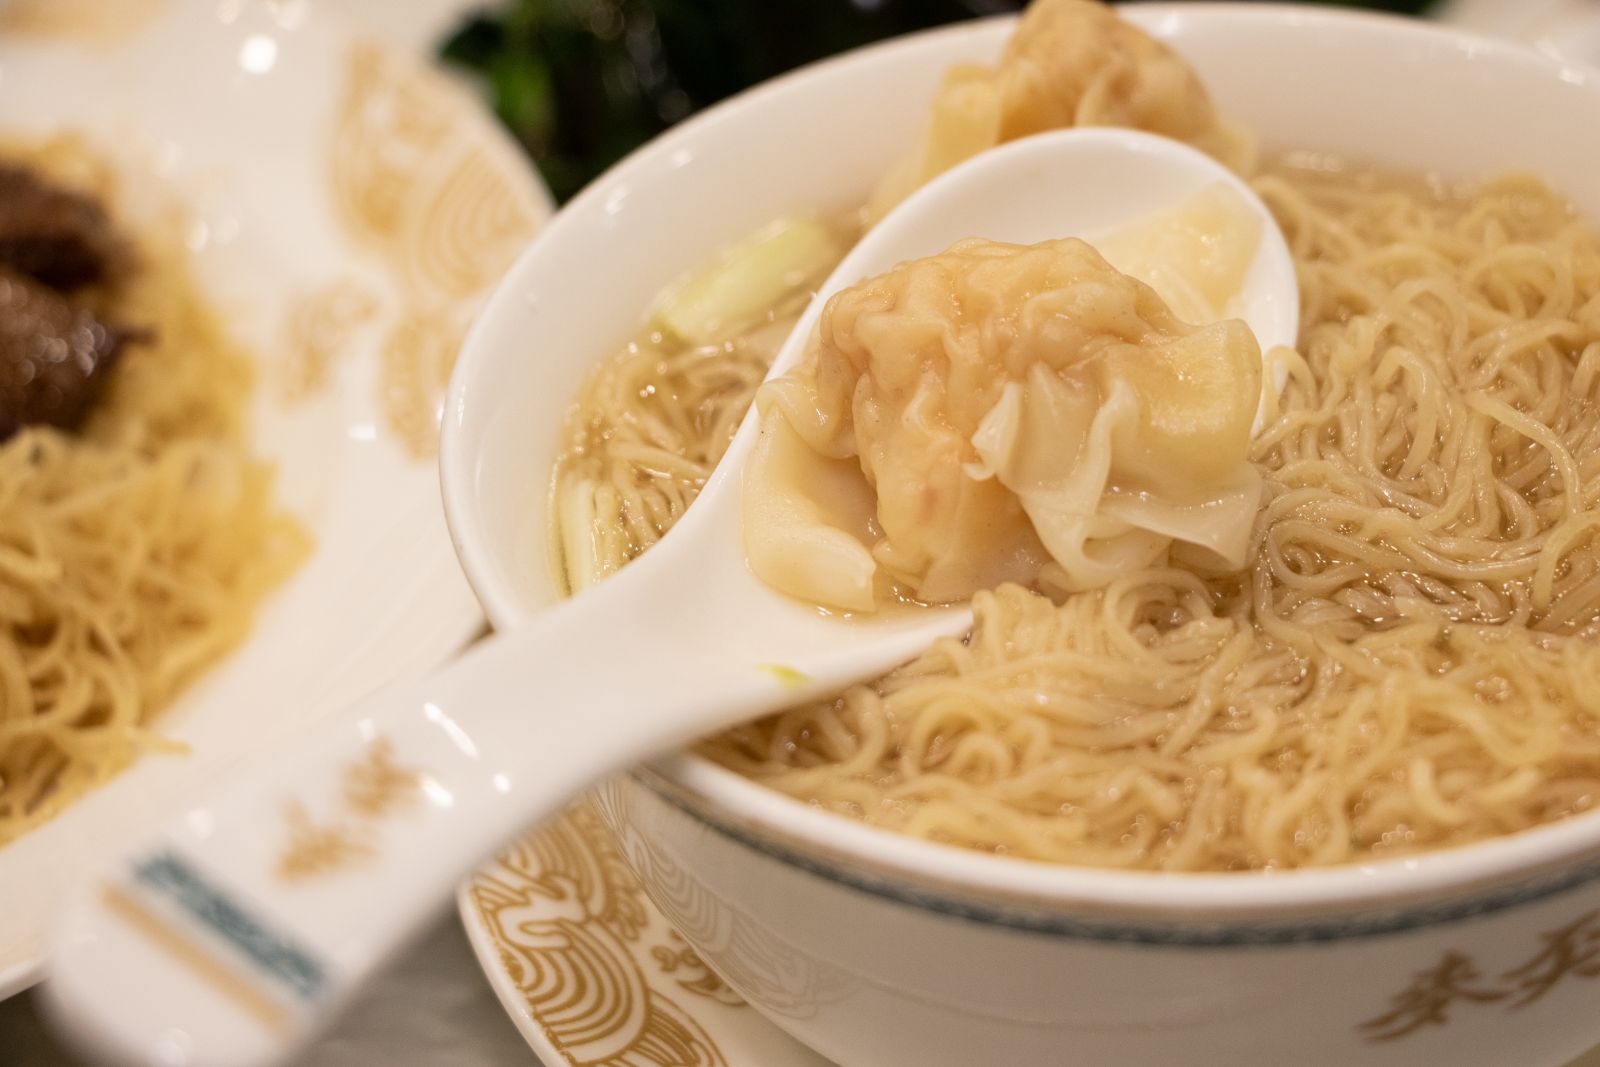 The wontons are still flavour-packed and filled with crunchy shrimp